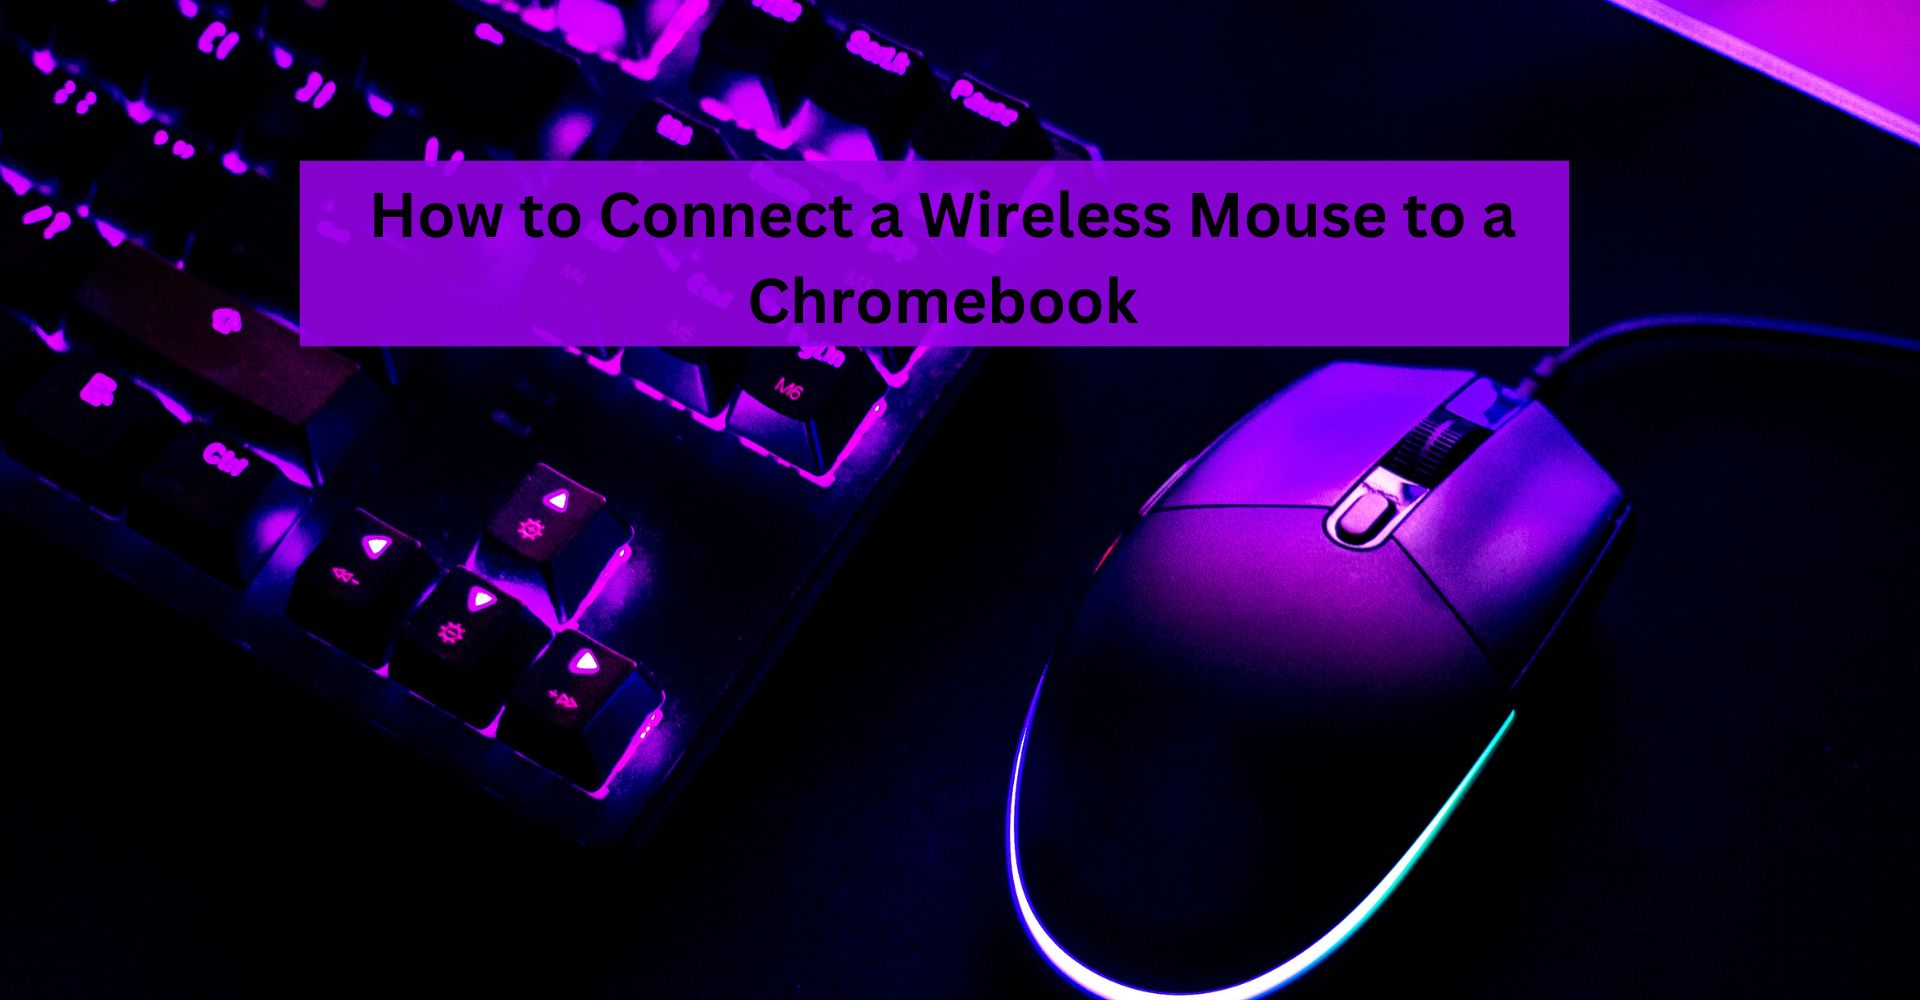 How to Connect a Wireless Mouse to a Chromebook